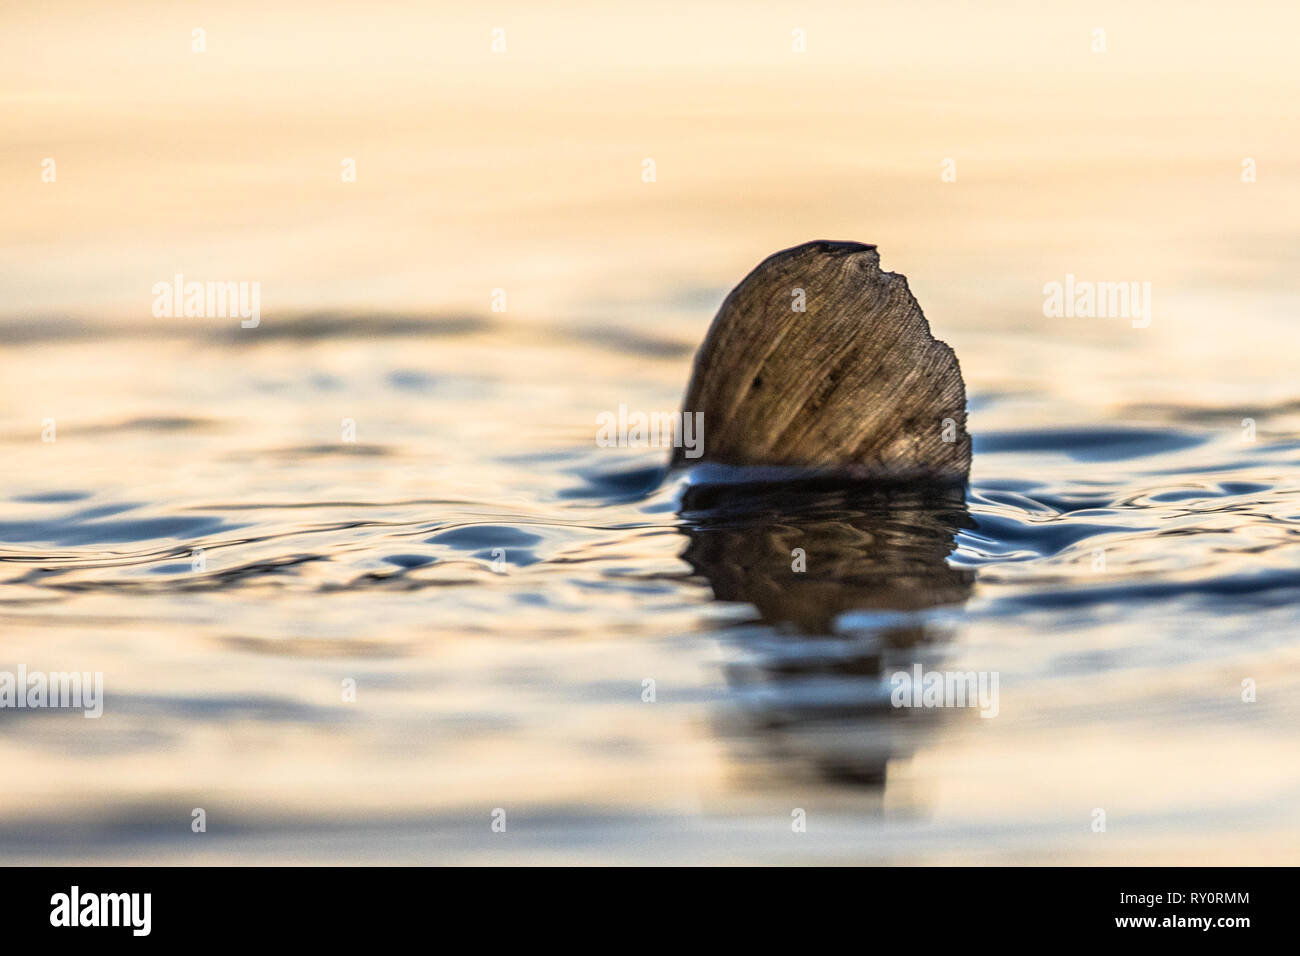 European carp (Cyprinus carpio) spawning eggs underwater in shallow water of lake at sunset. Only fin is visible. Stock Photo